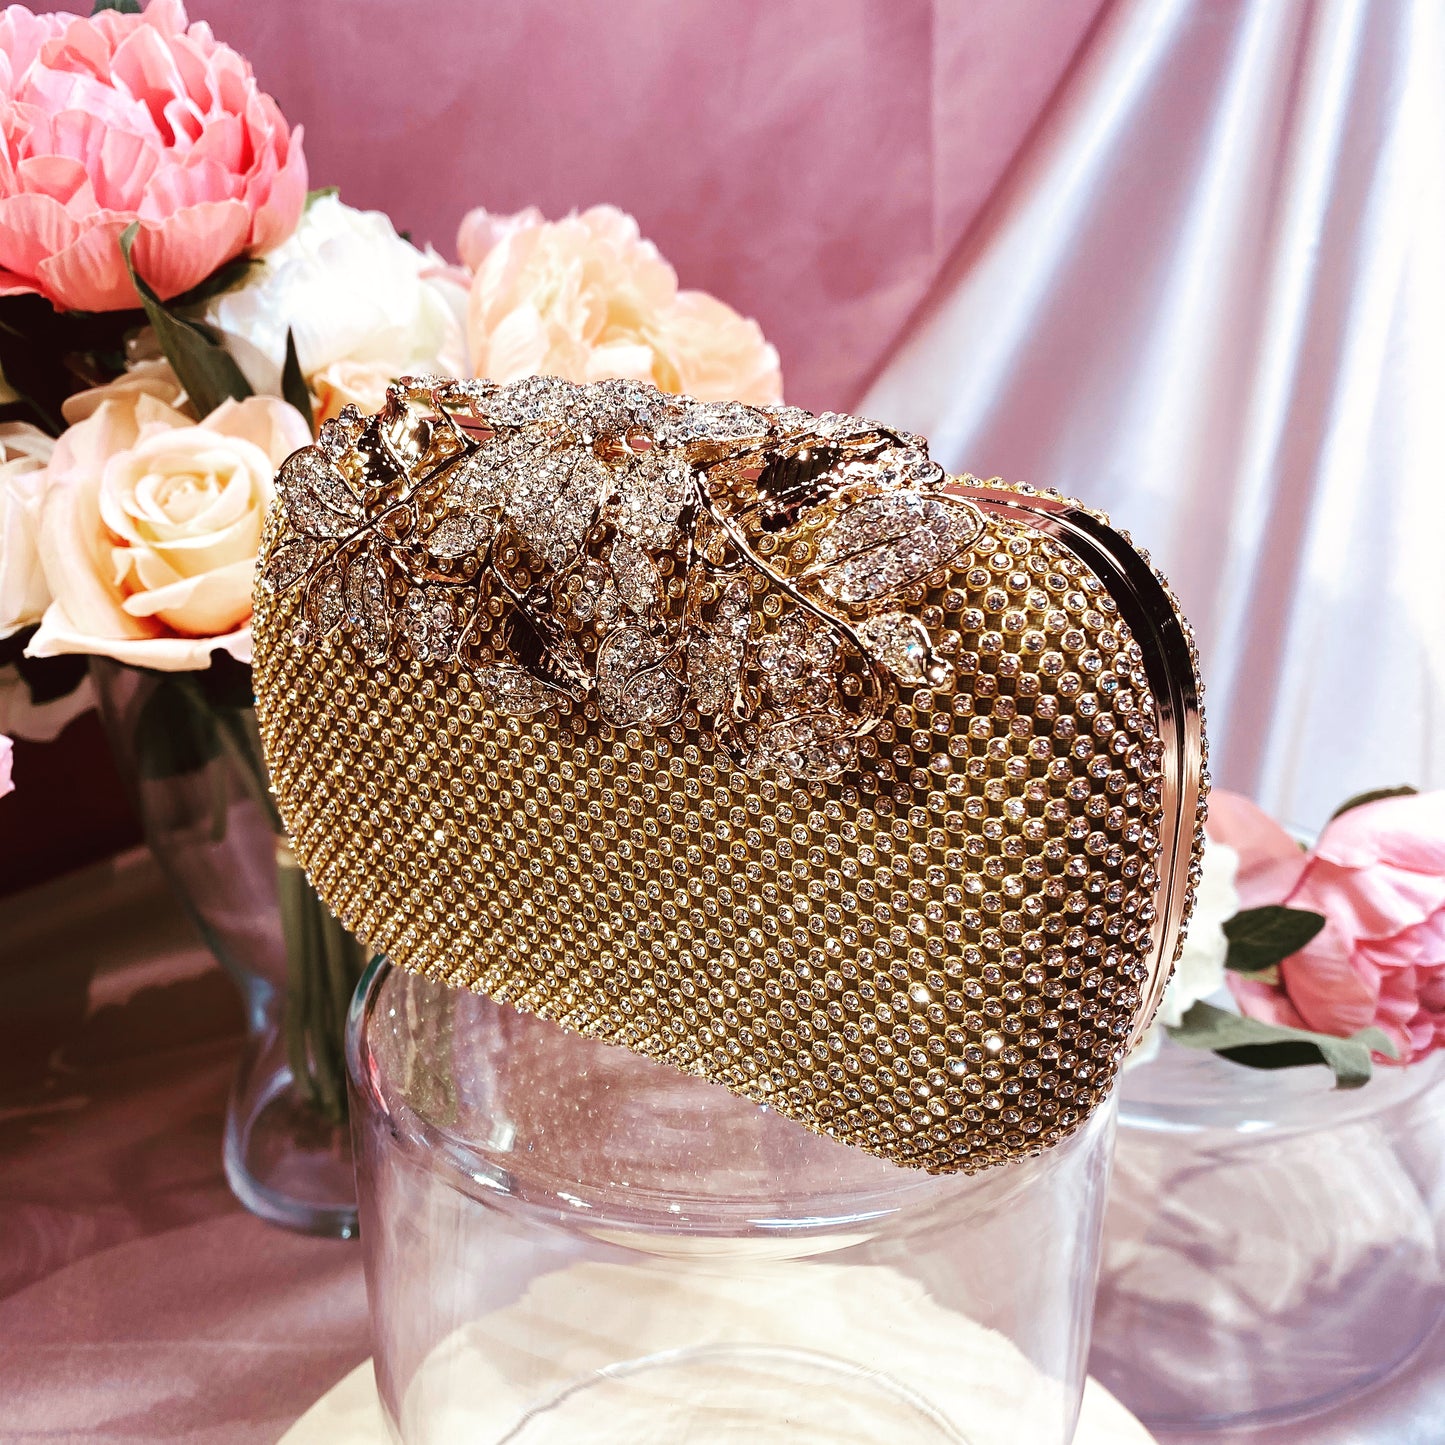 #12819102 Roses cover Rhinestone Clutches (Golden, Silver, Black)